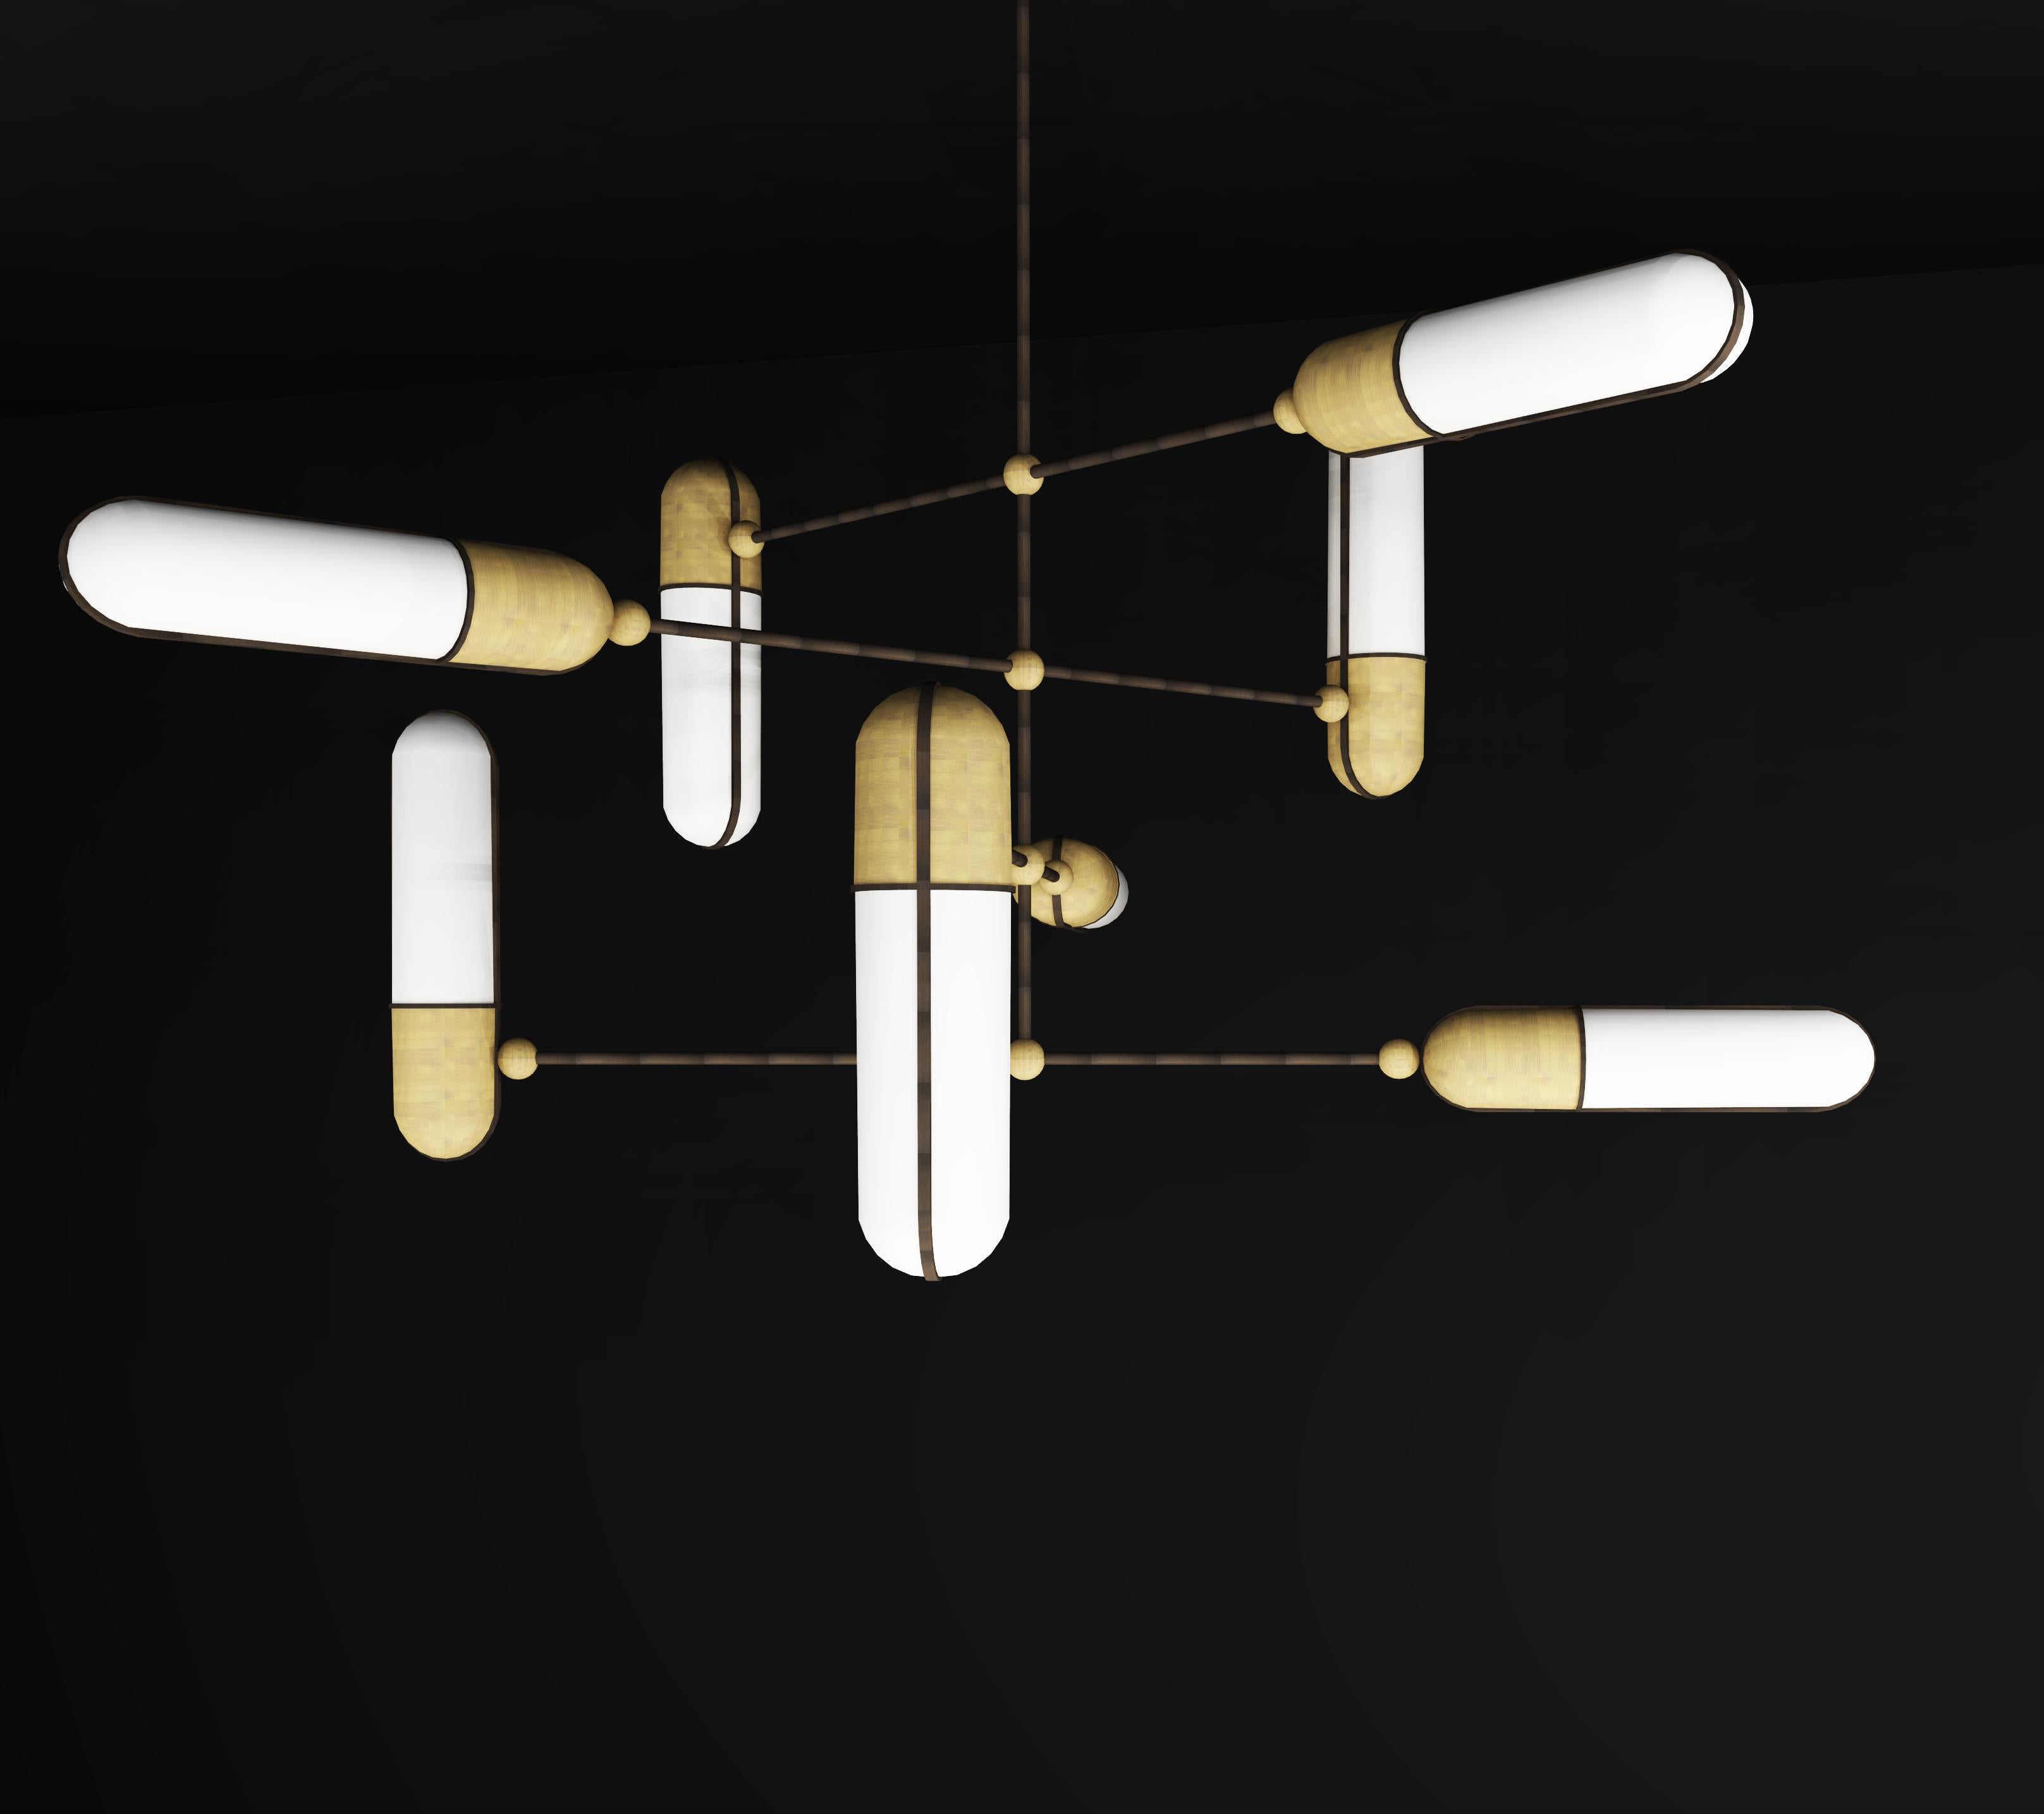 European Imagin Deco Chandelier in Antique Bronze, Antique Brass and Frosted Glass For Sale